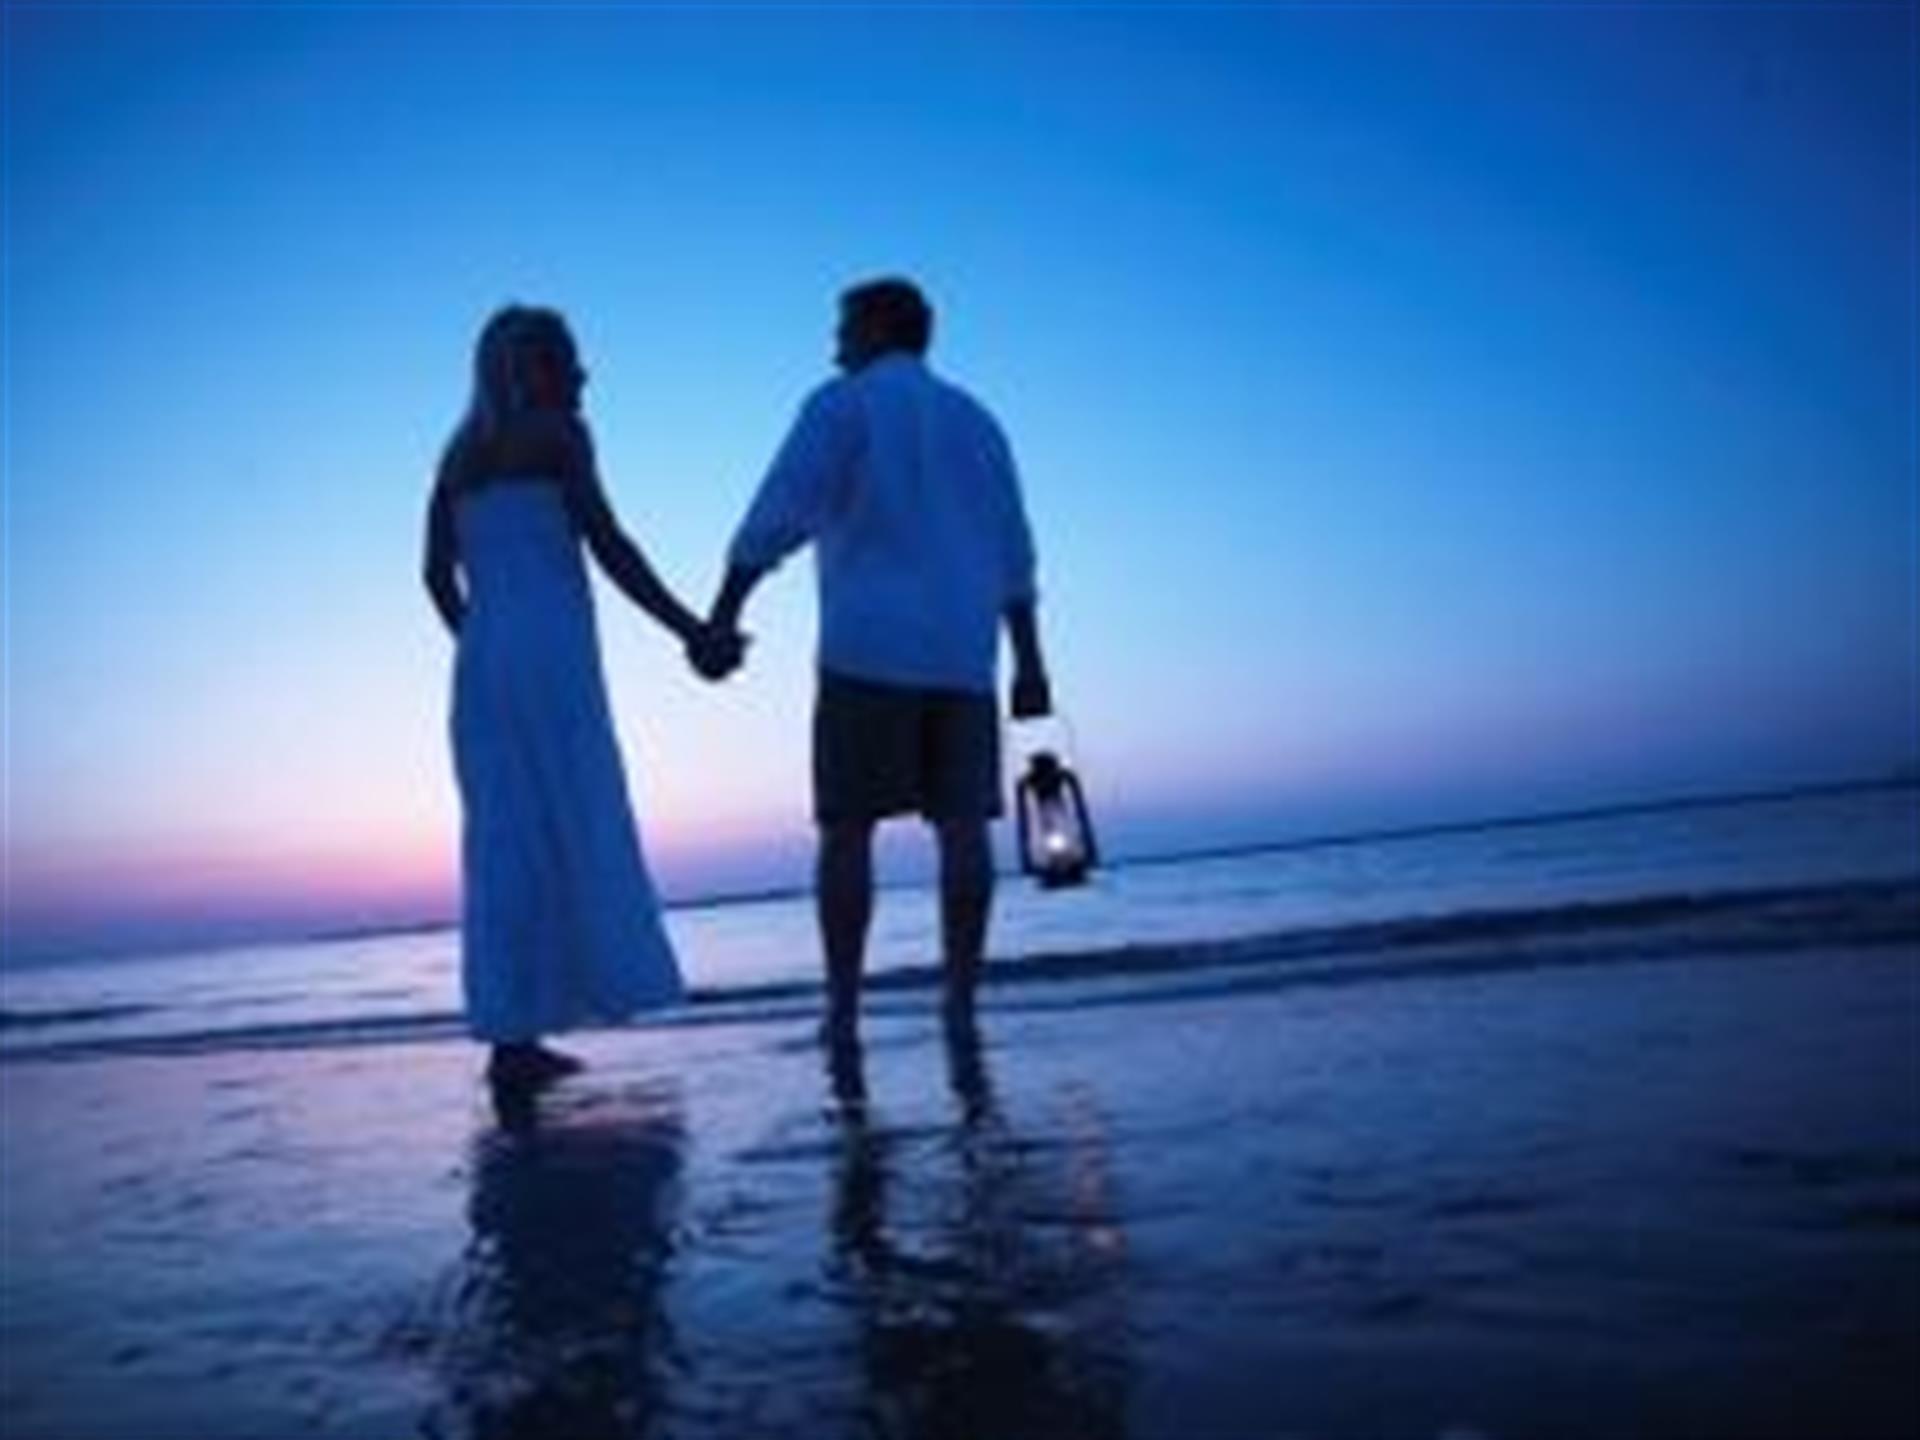 Spend a romantic Valentines Day on Bald Head Island.